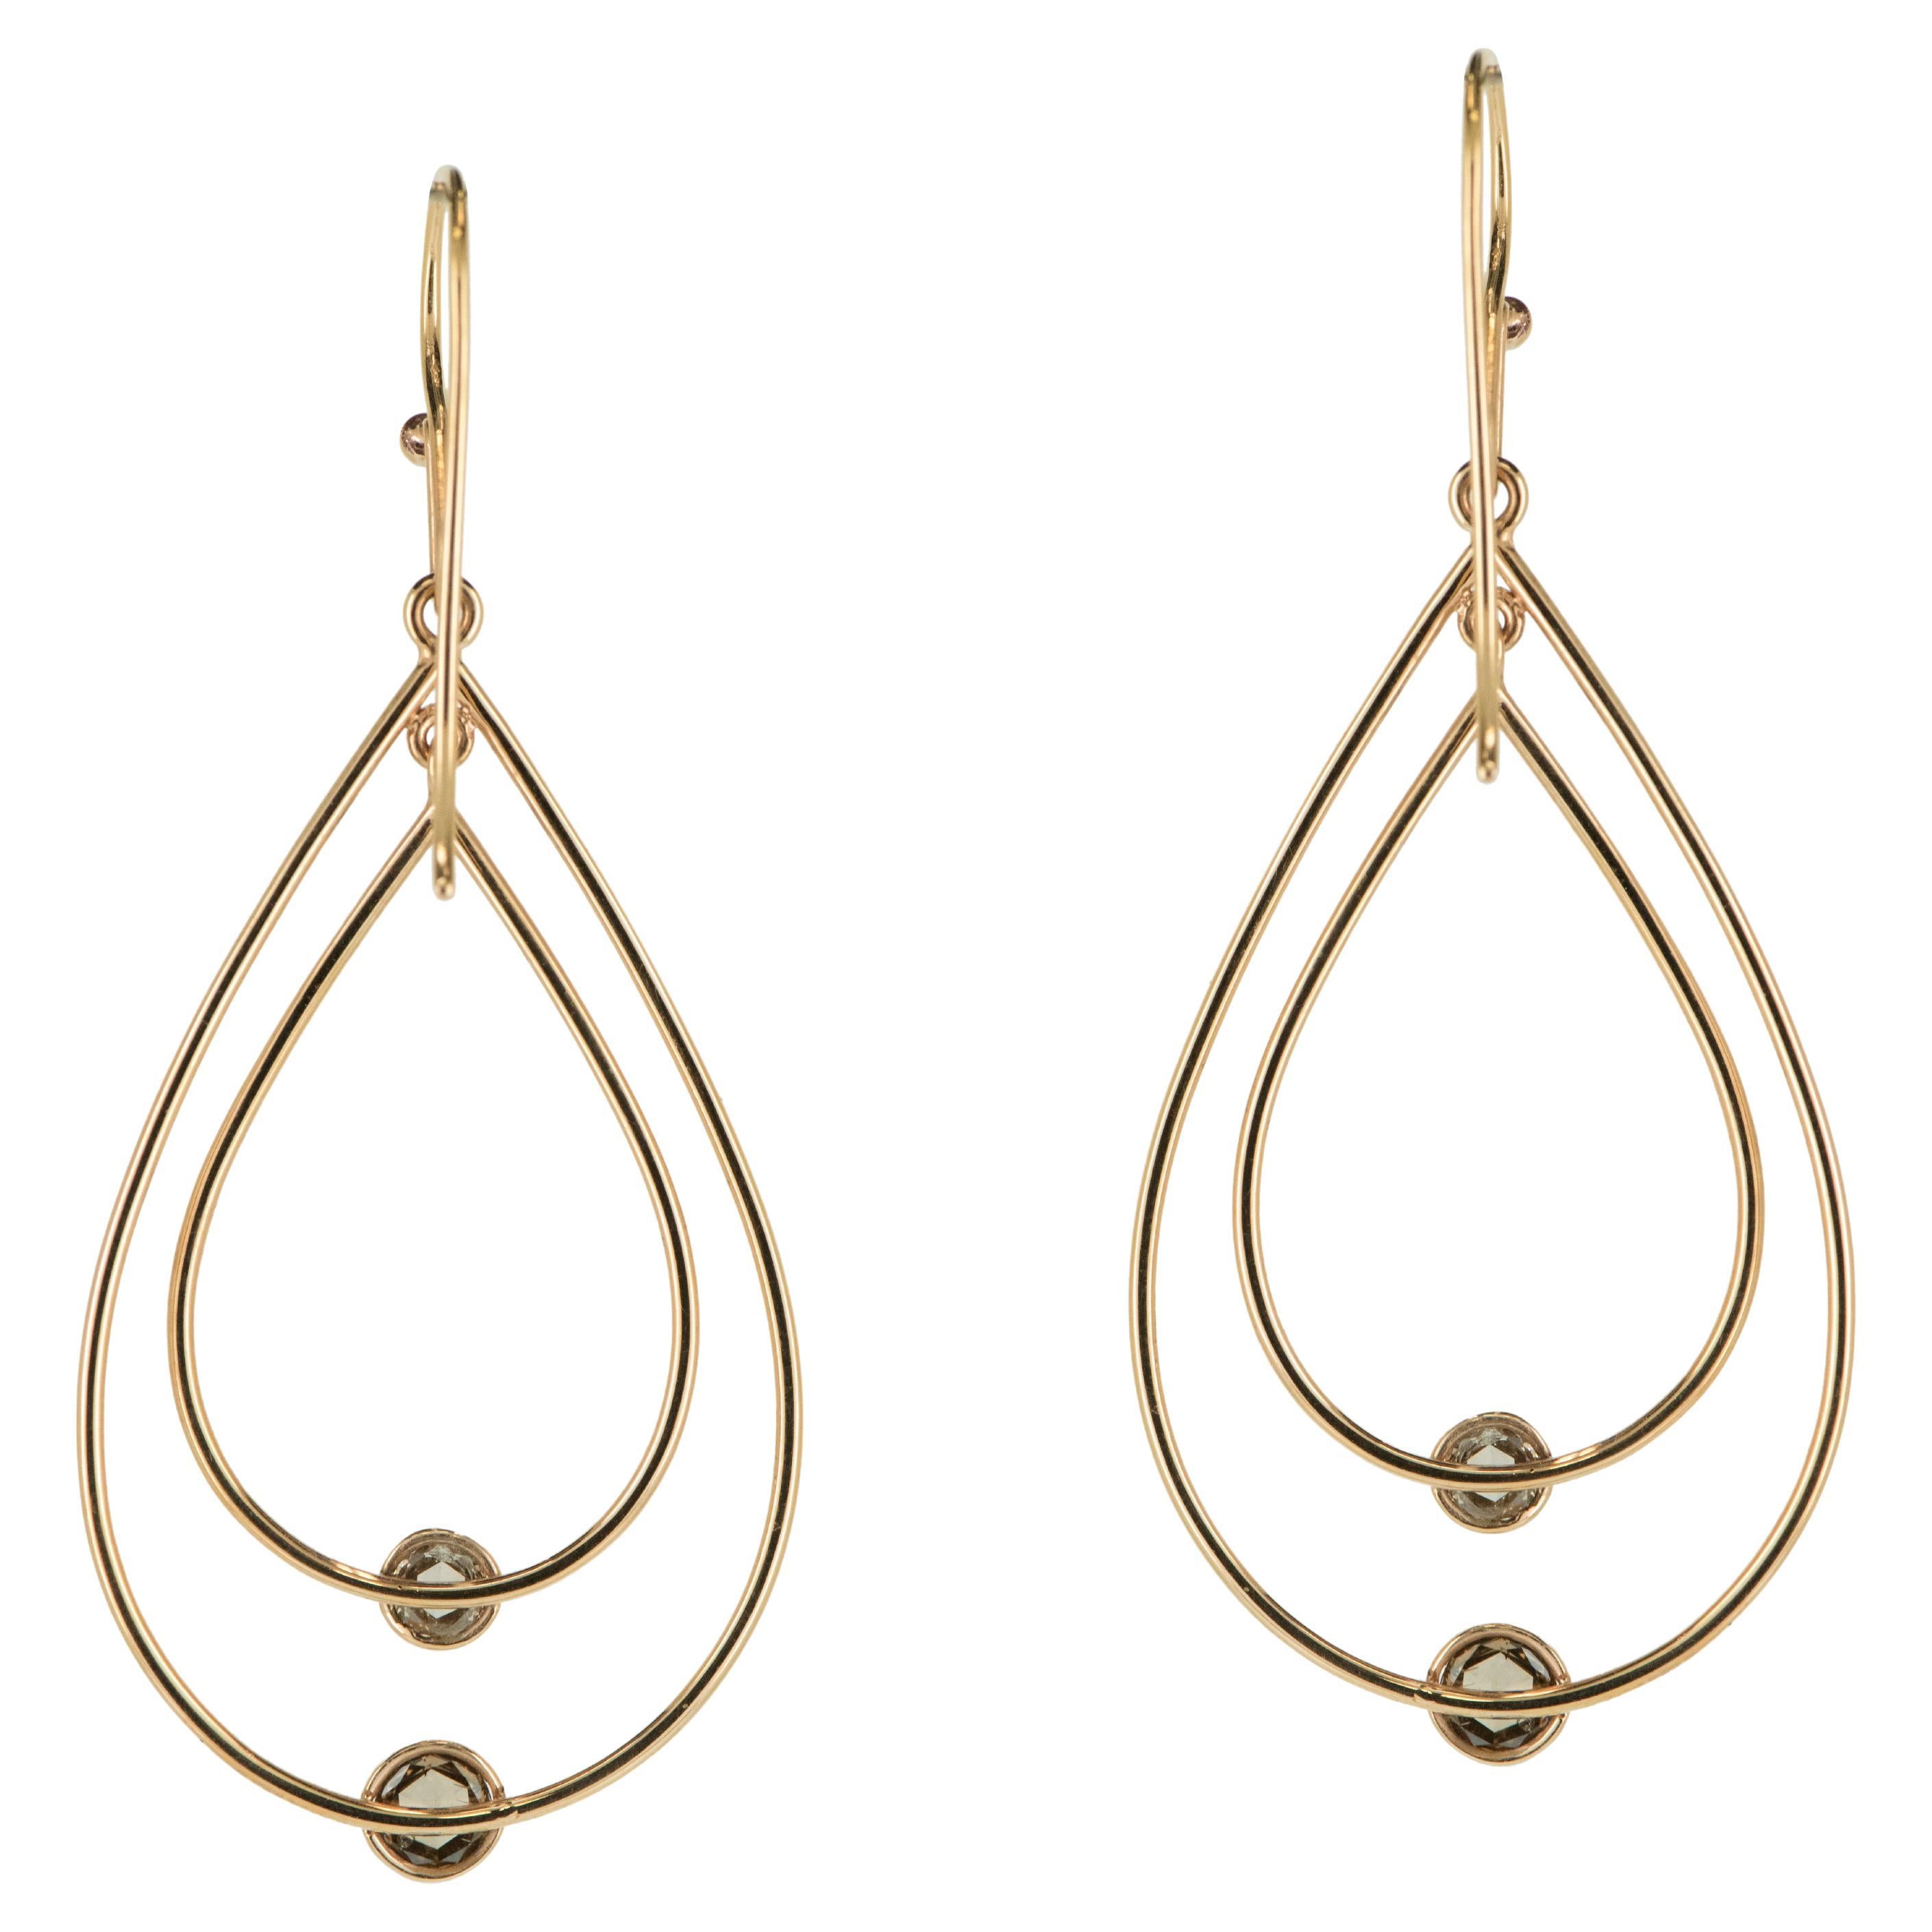 Measuring approximately 1 inch in length, these 18 Karat Rose Gold Dangle Earrings with Cognac Diamonds are the perfect addition to any jewelry collection. The rose cut diamonds and rose gold accents work together to create a stunning display that